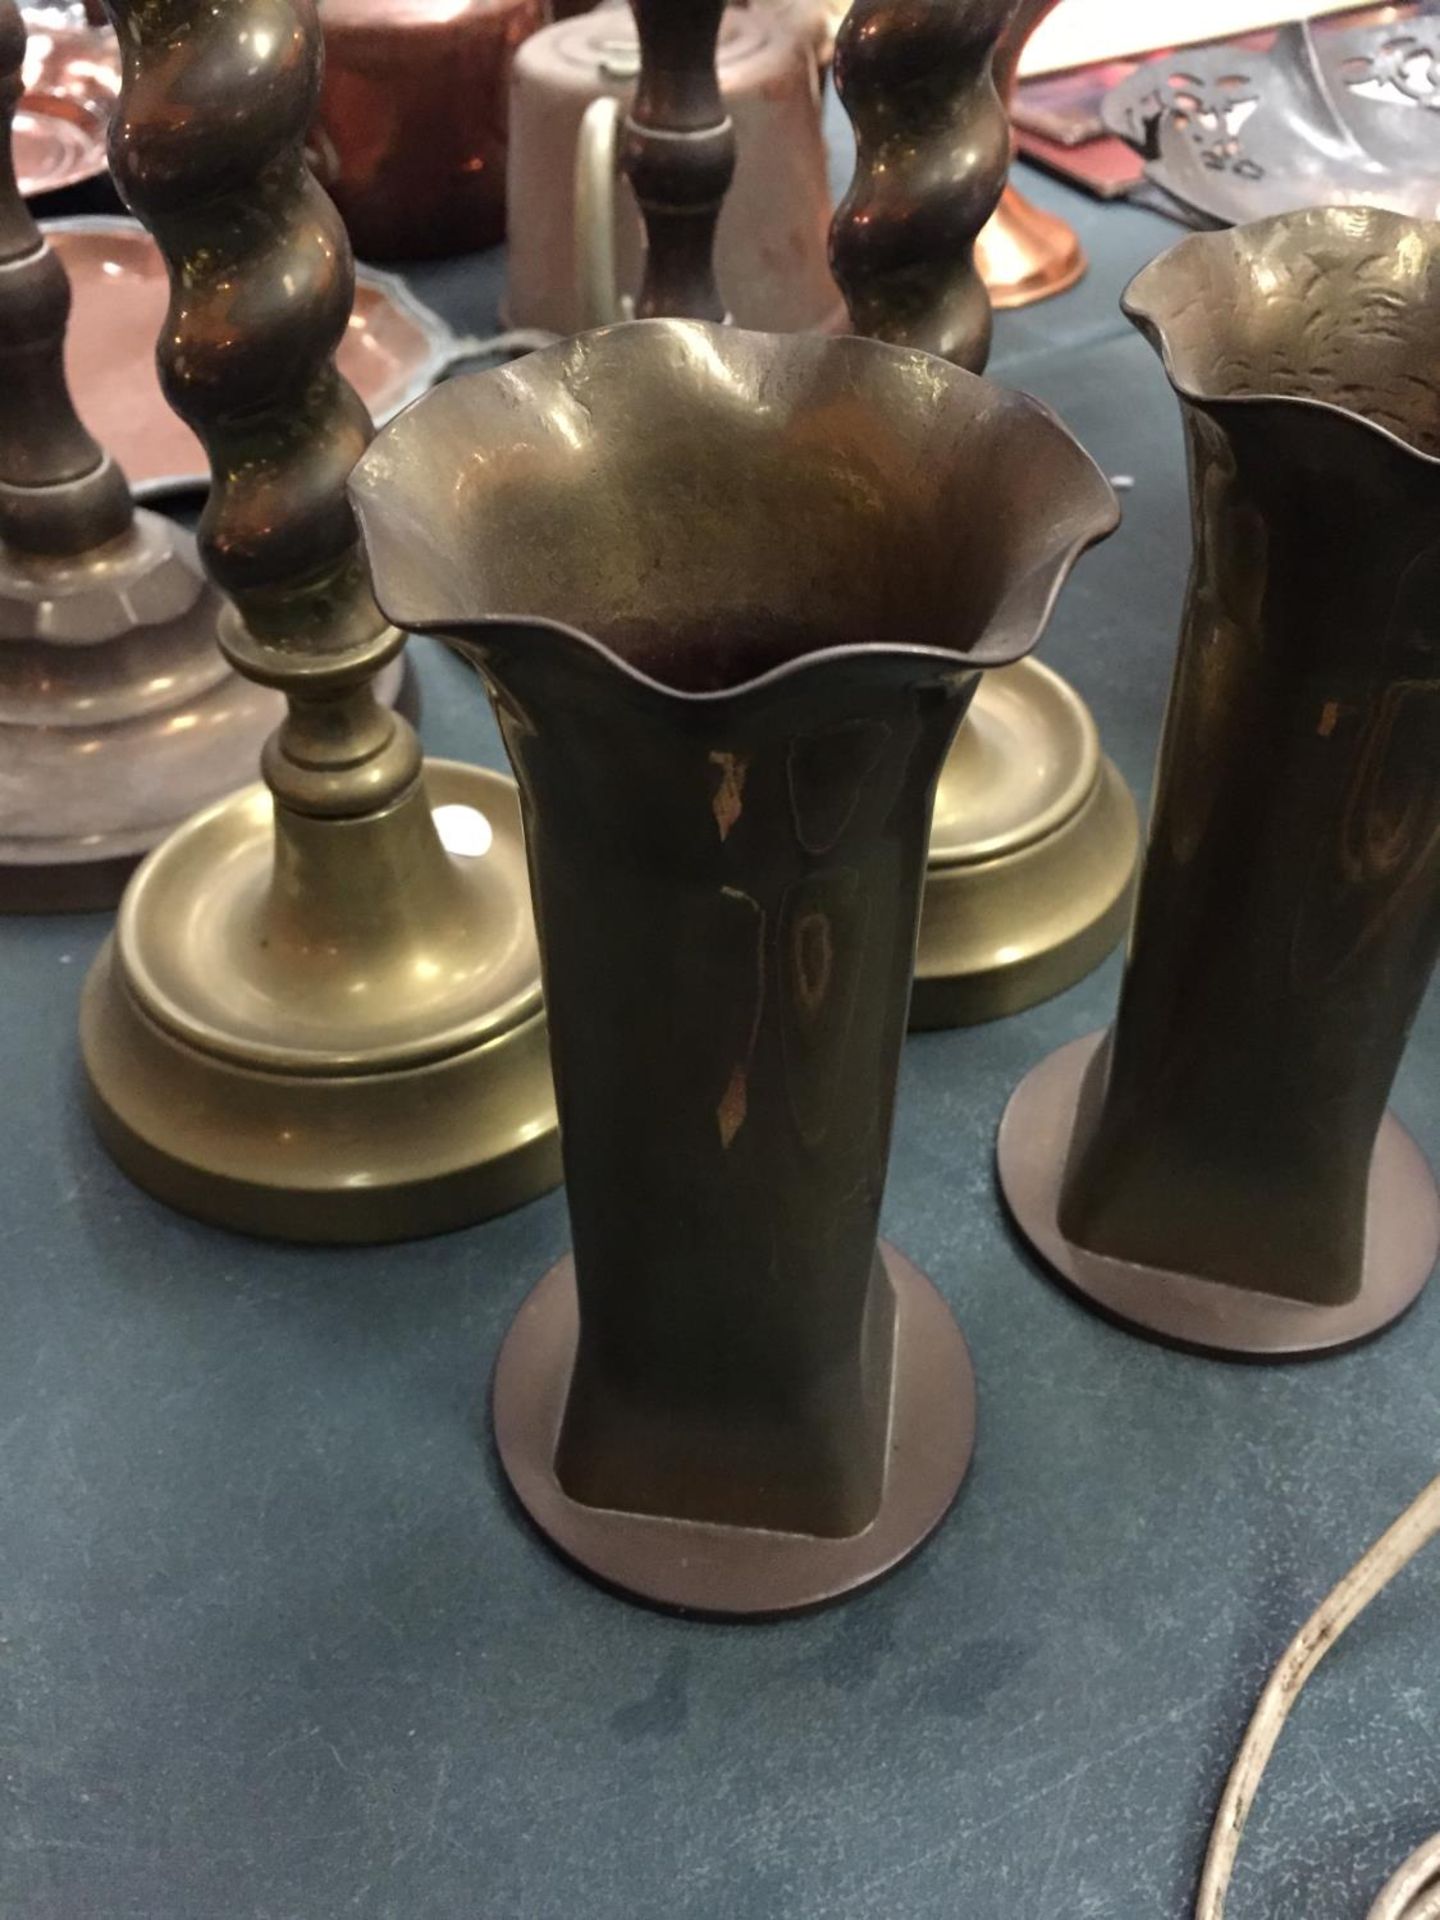 A PAIR OF TRENCH ART STYLE VASES HEIGHT 17CM, A PAIR OF BARLEYTWIST BRASS CANDLESTICKS HEIGHT 30CM - Image 2 of 4